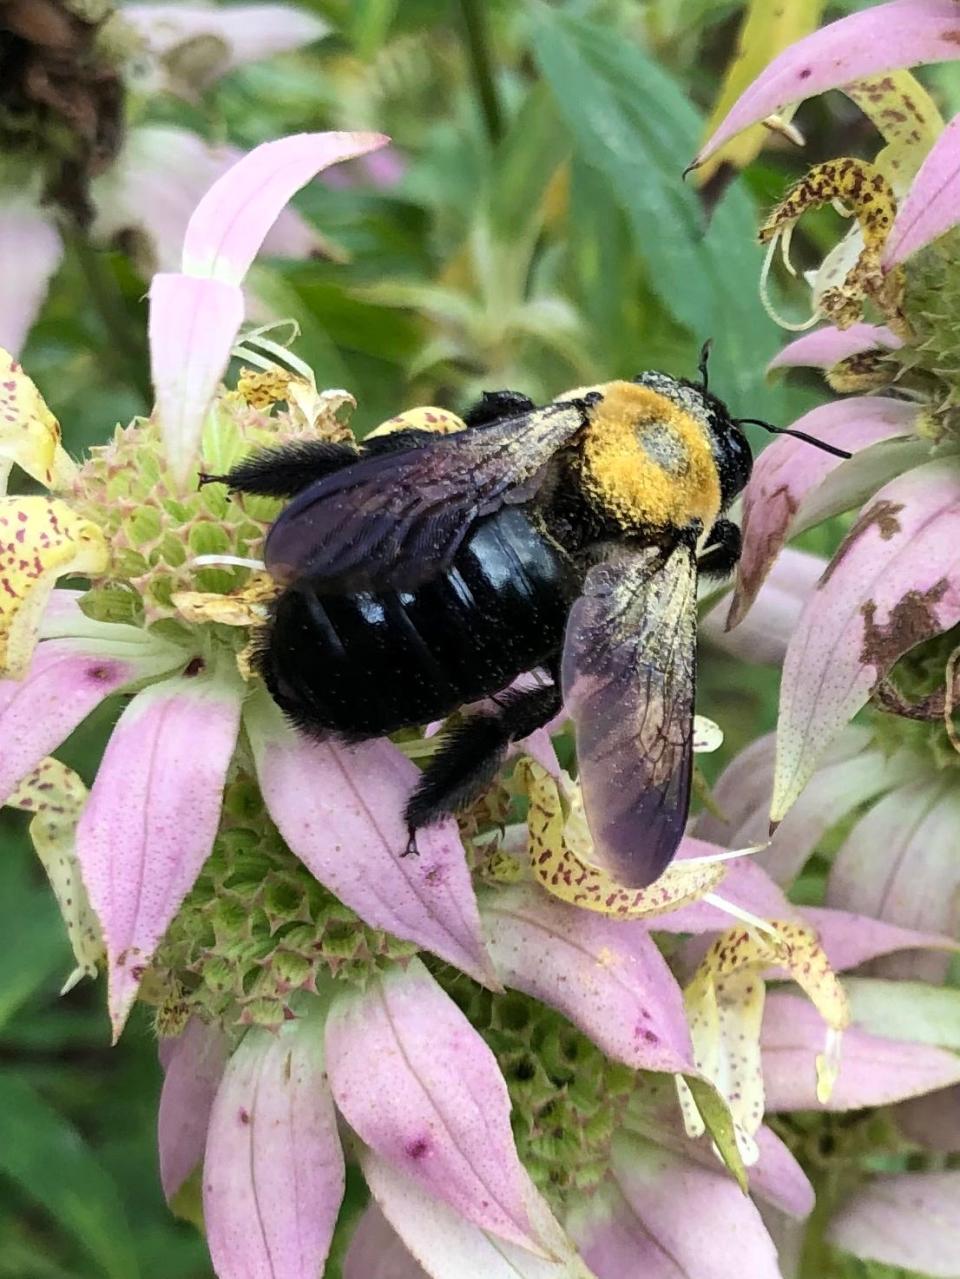 Bumblebees gather loads of pollen from this native plant, the Spotted Horsemint.